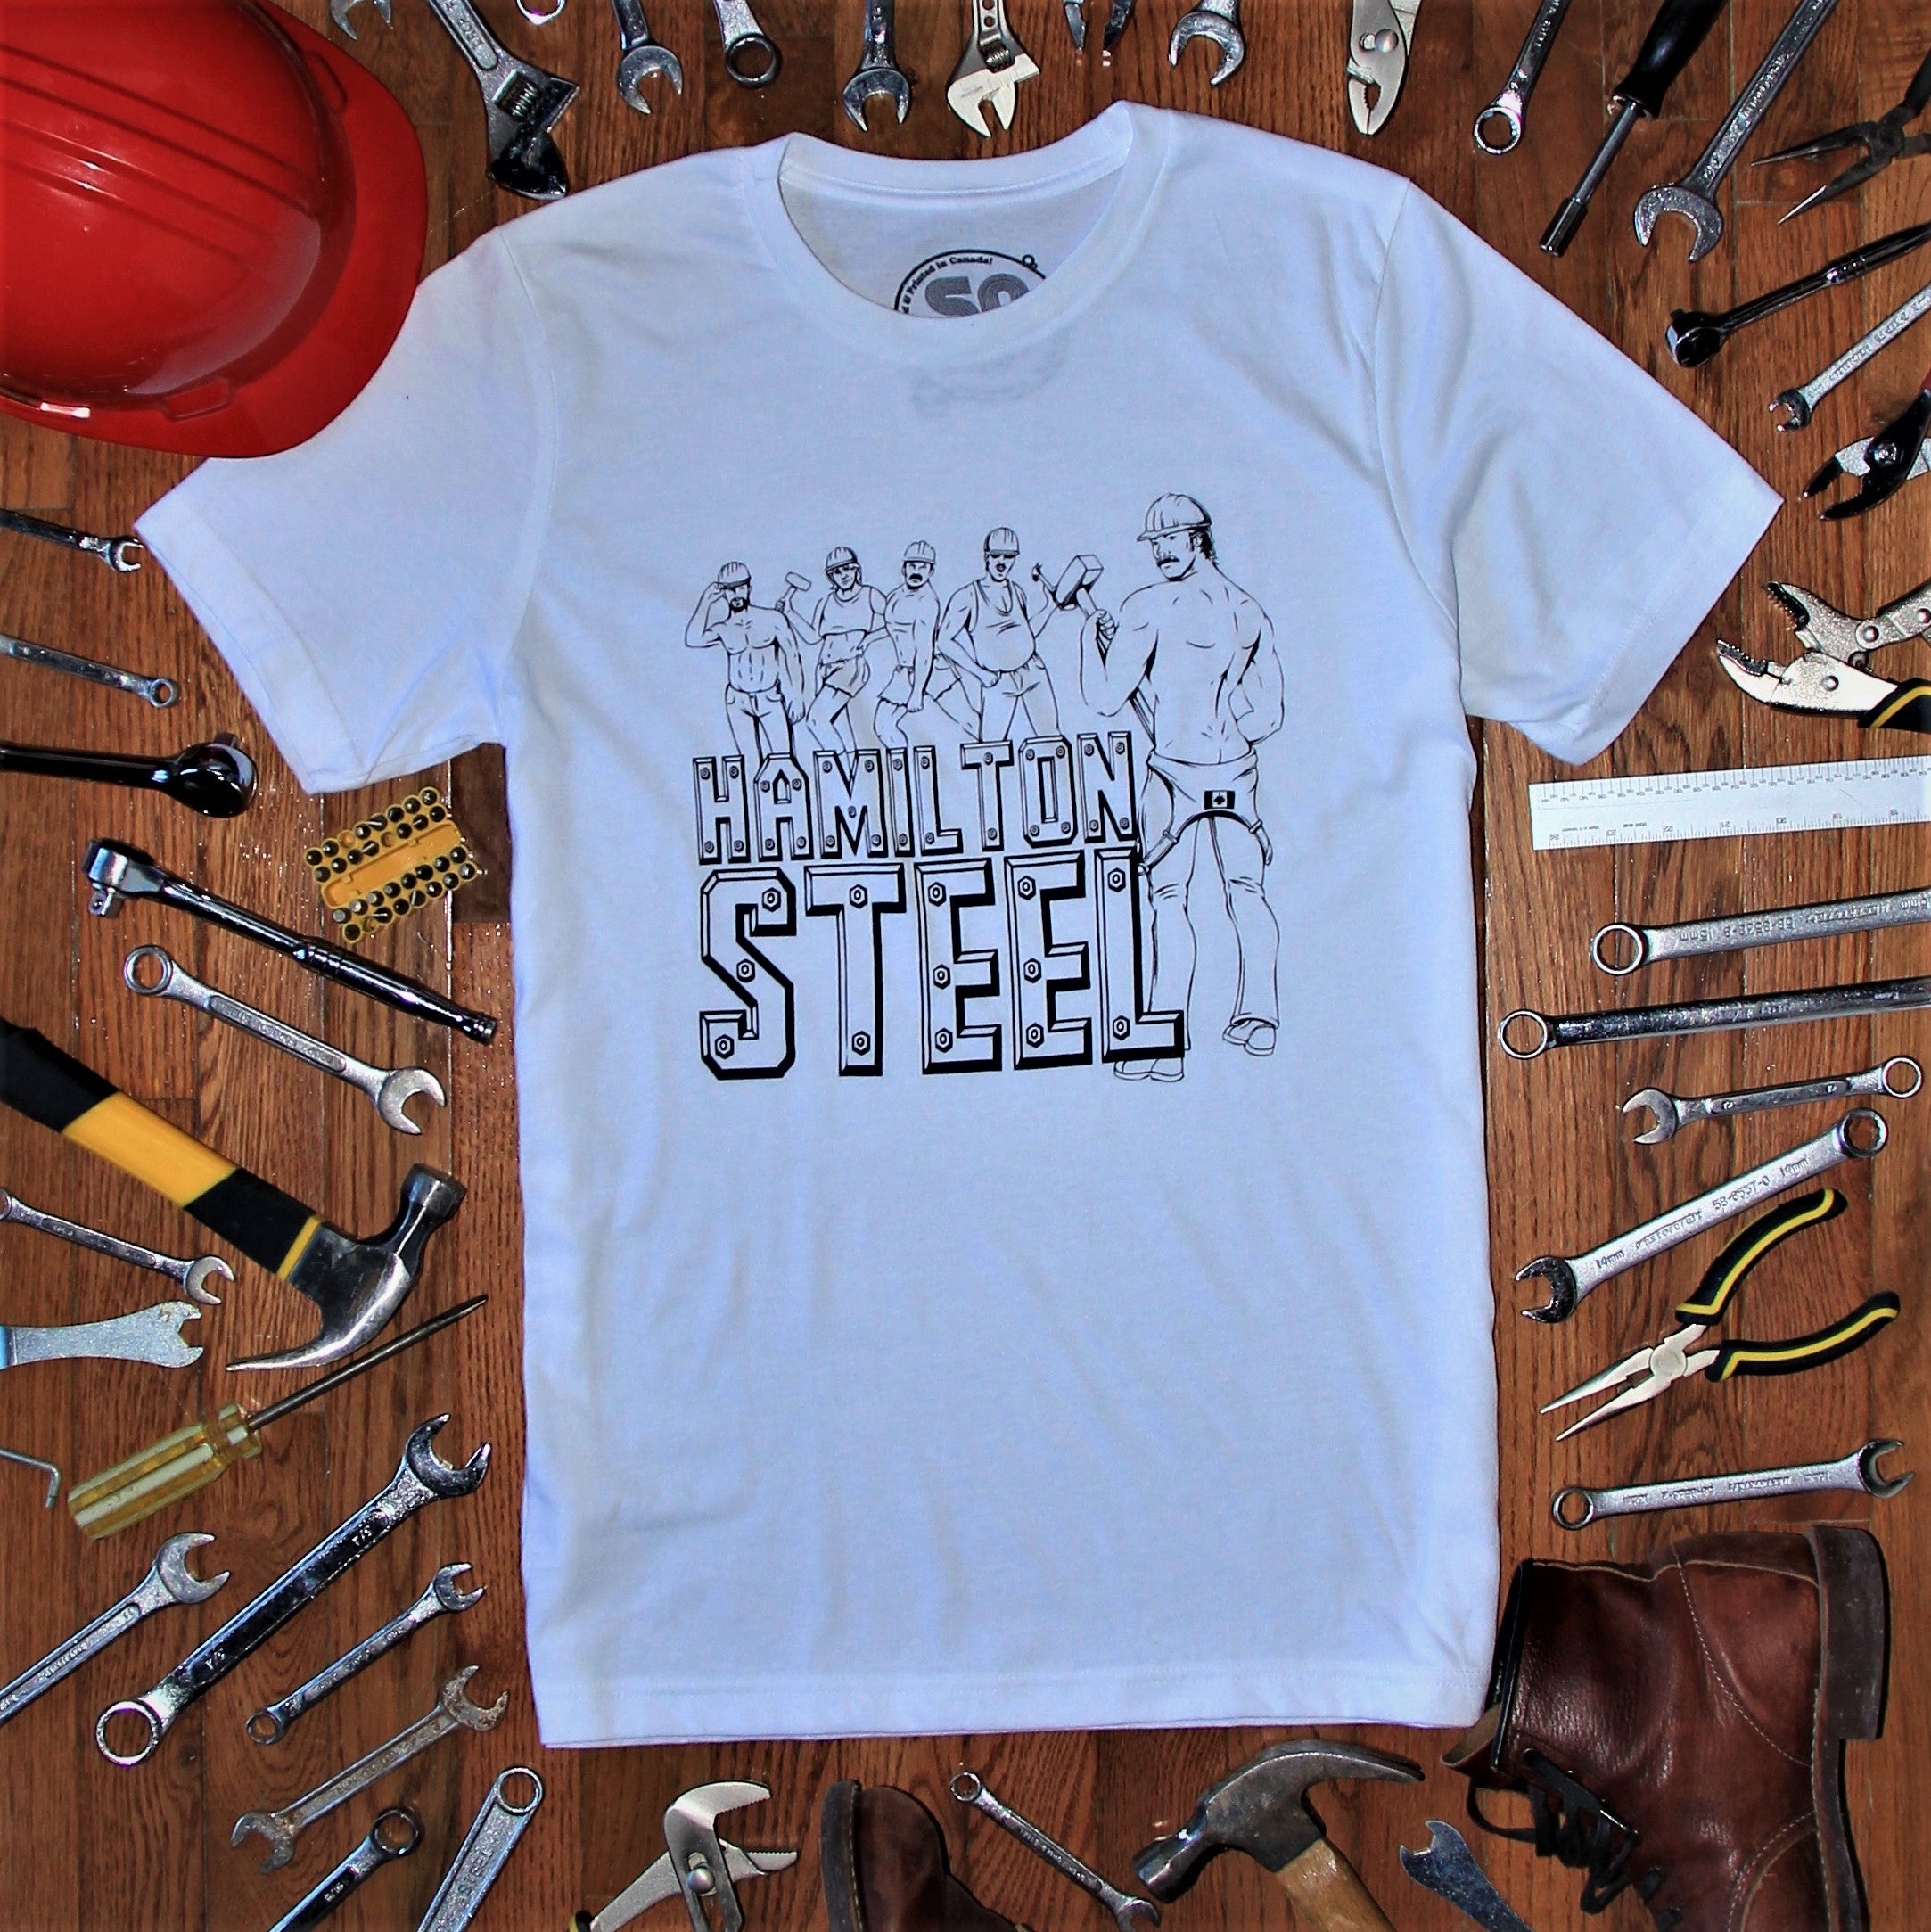 HAMILTON STEEL TEE - BLACK - white t-shirt with black text reading 'HAMILTON STEEL' with illustration of 5 men with hard hats and no shirts